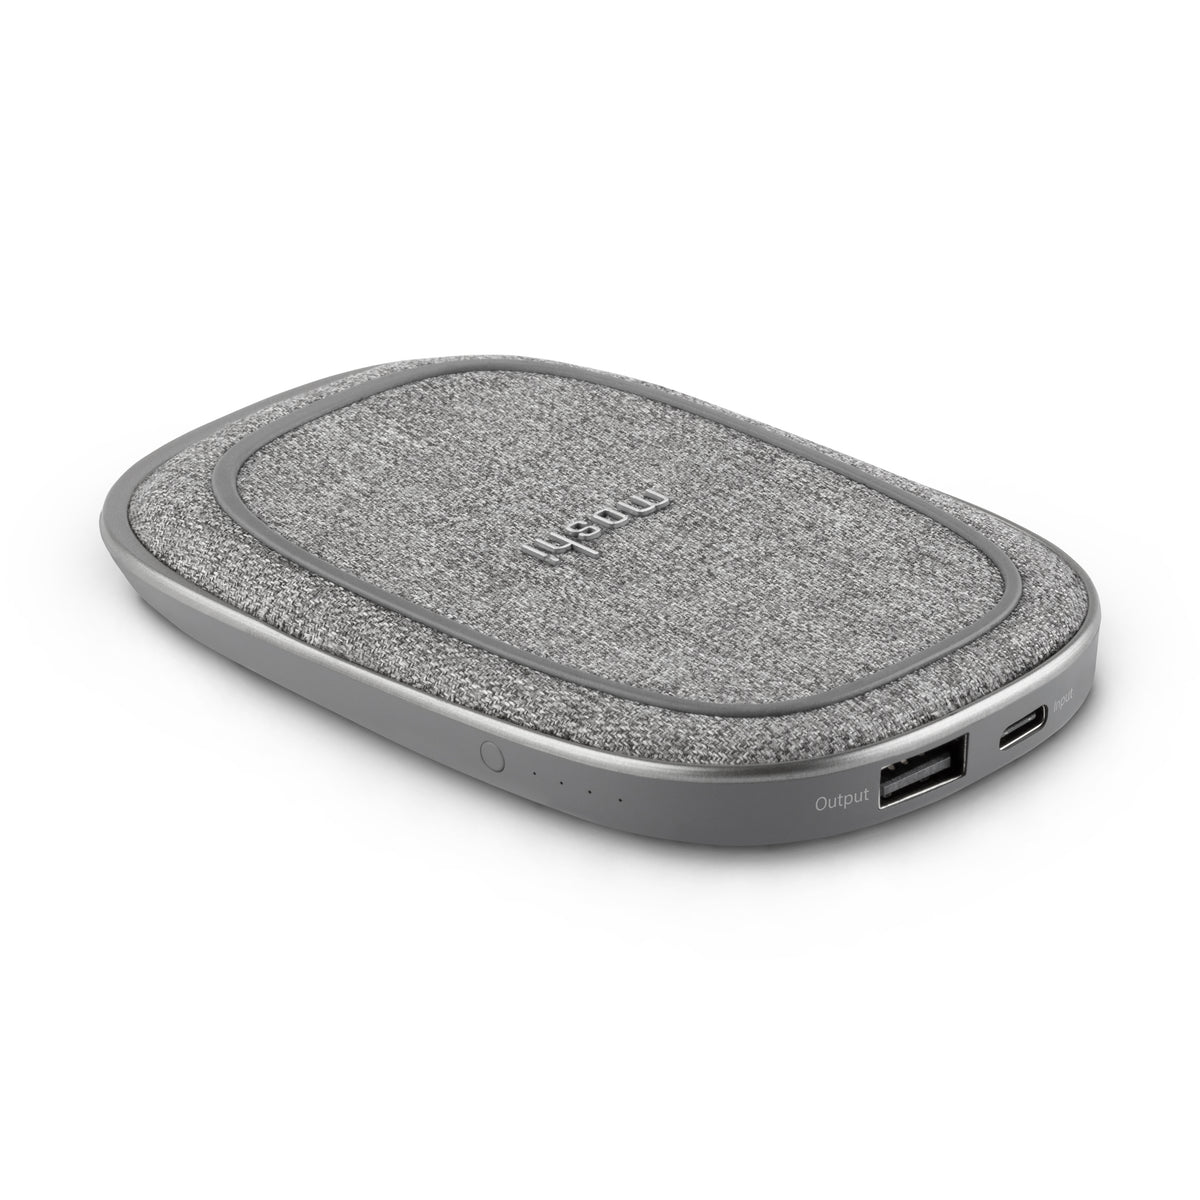 MOSHI Porto Q 5K Portable Battery 5,000 mAh with Built-in Wireless Charger with USB-C to USB-A Cable  - Nordic Gray